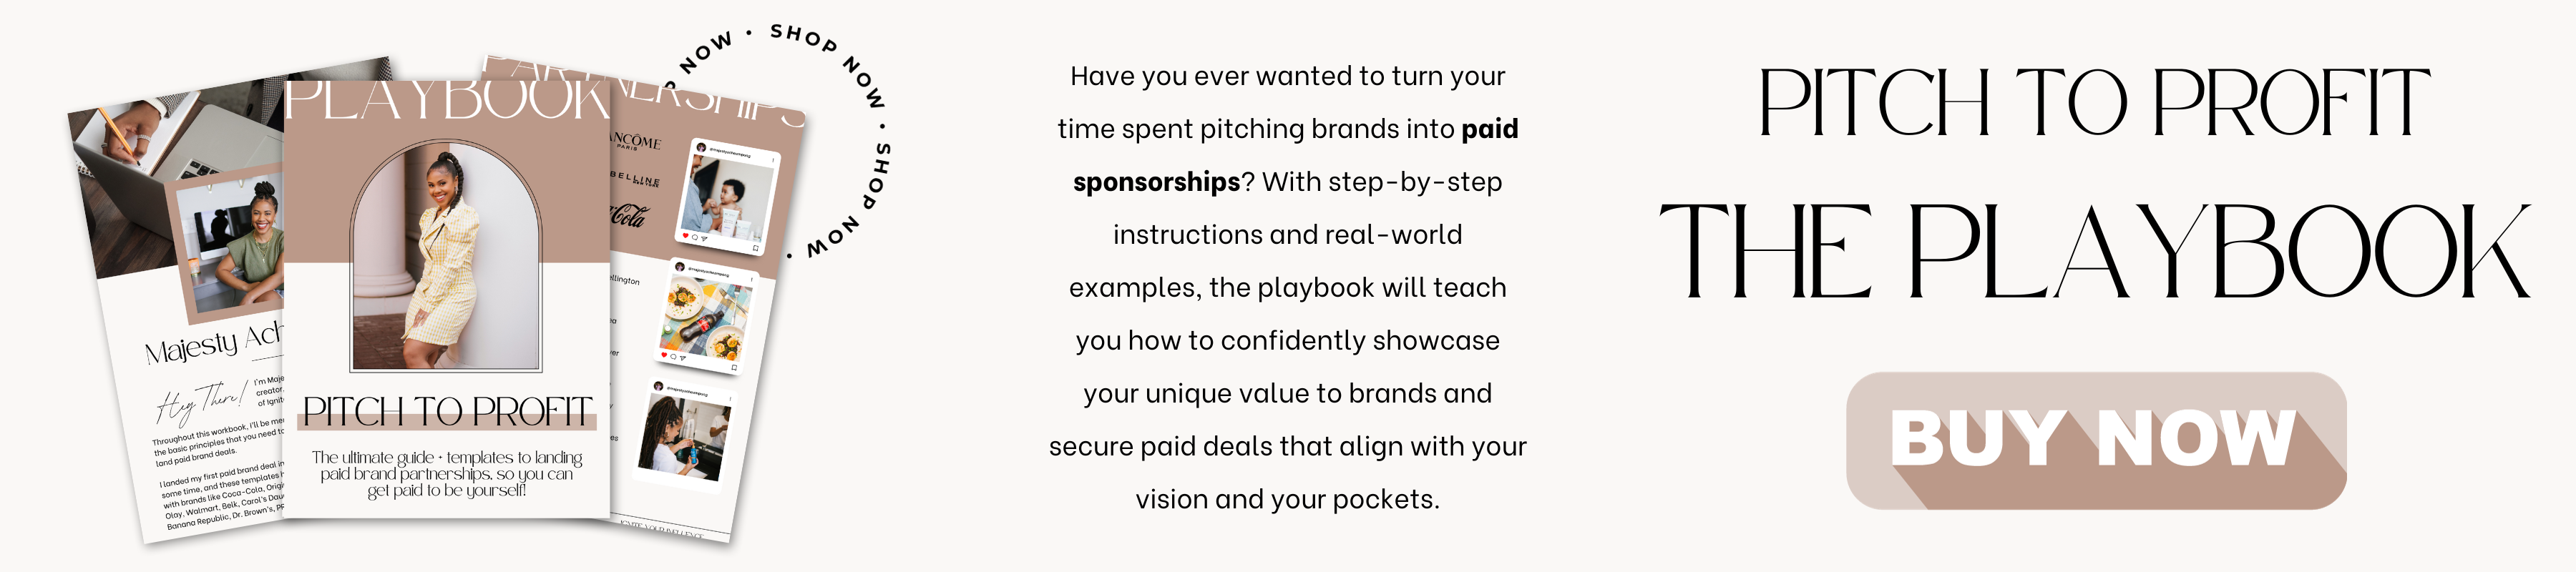 brand pitch email template